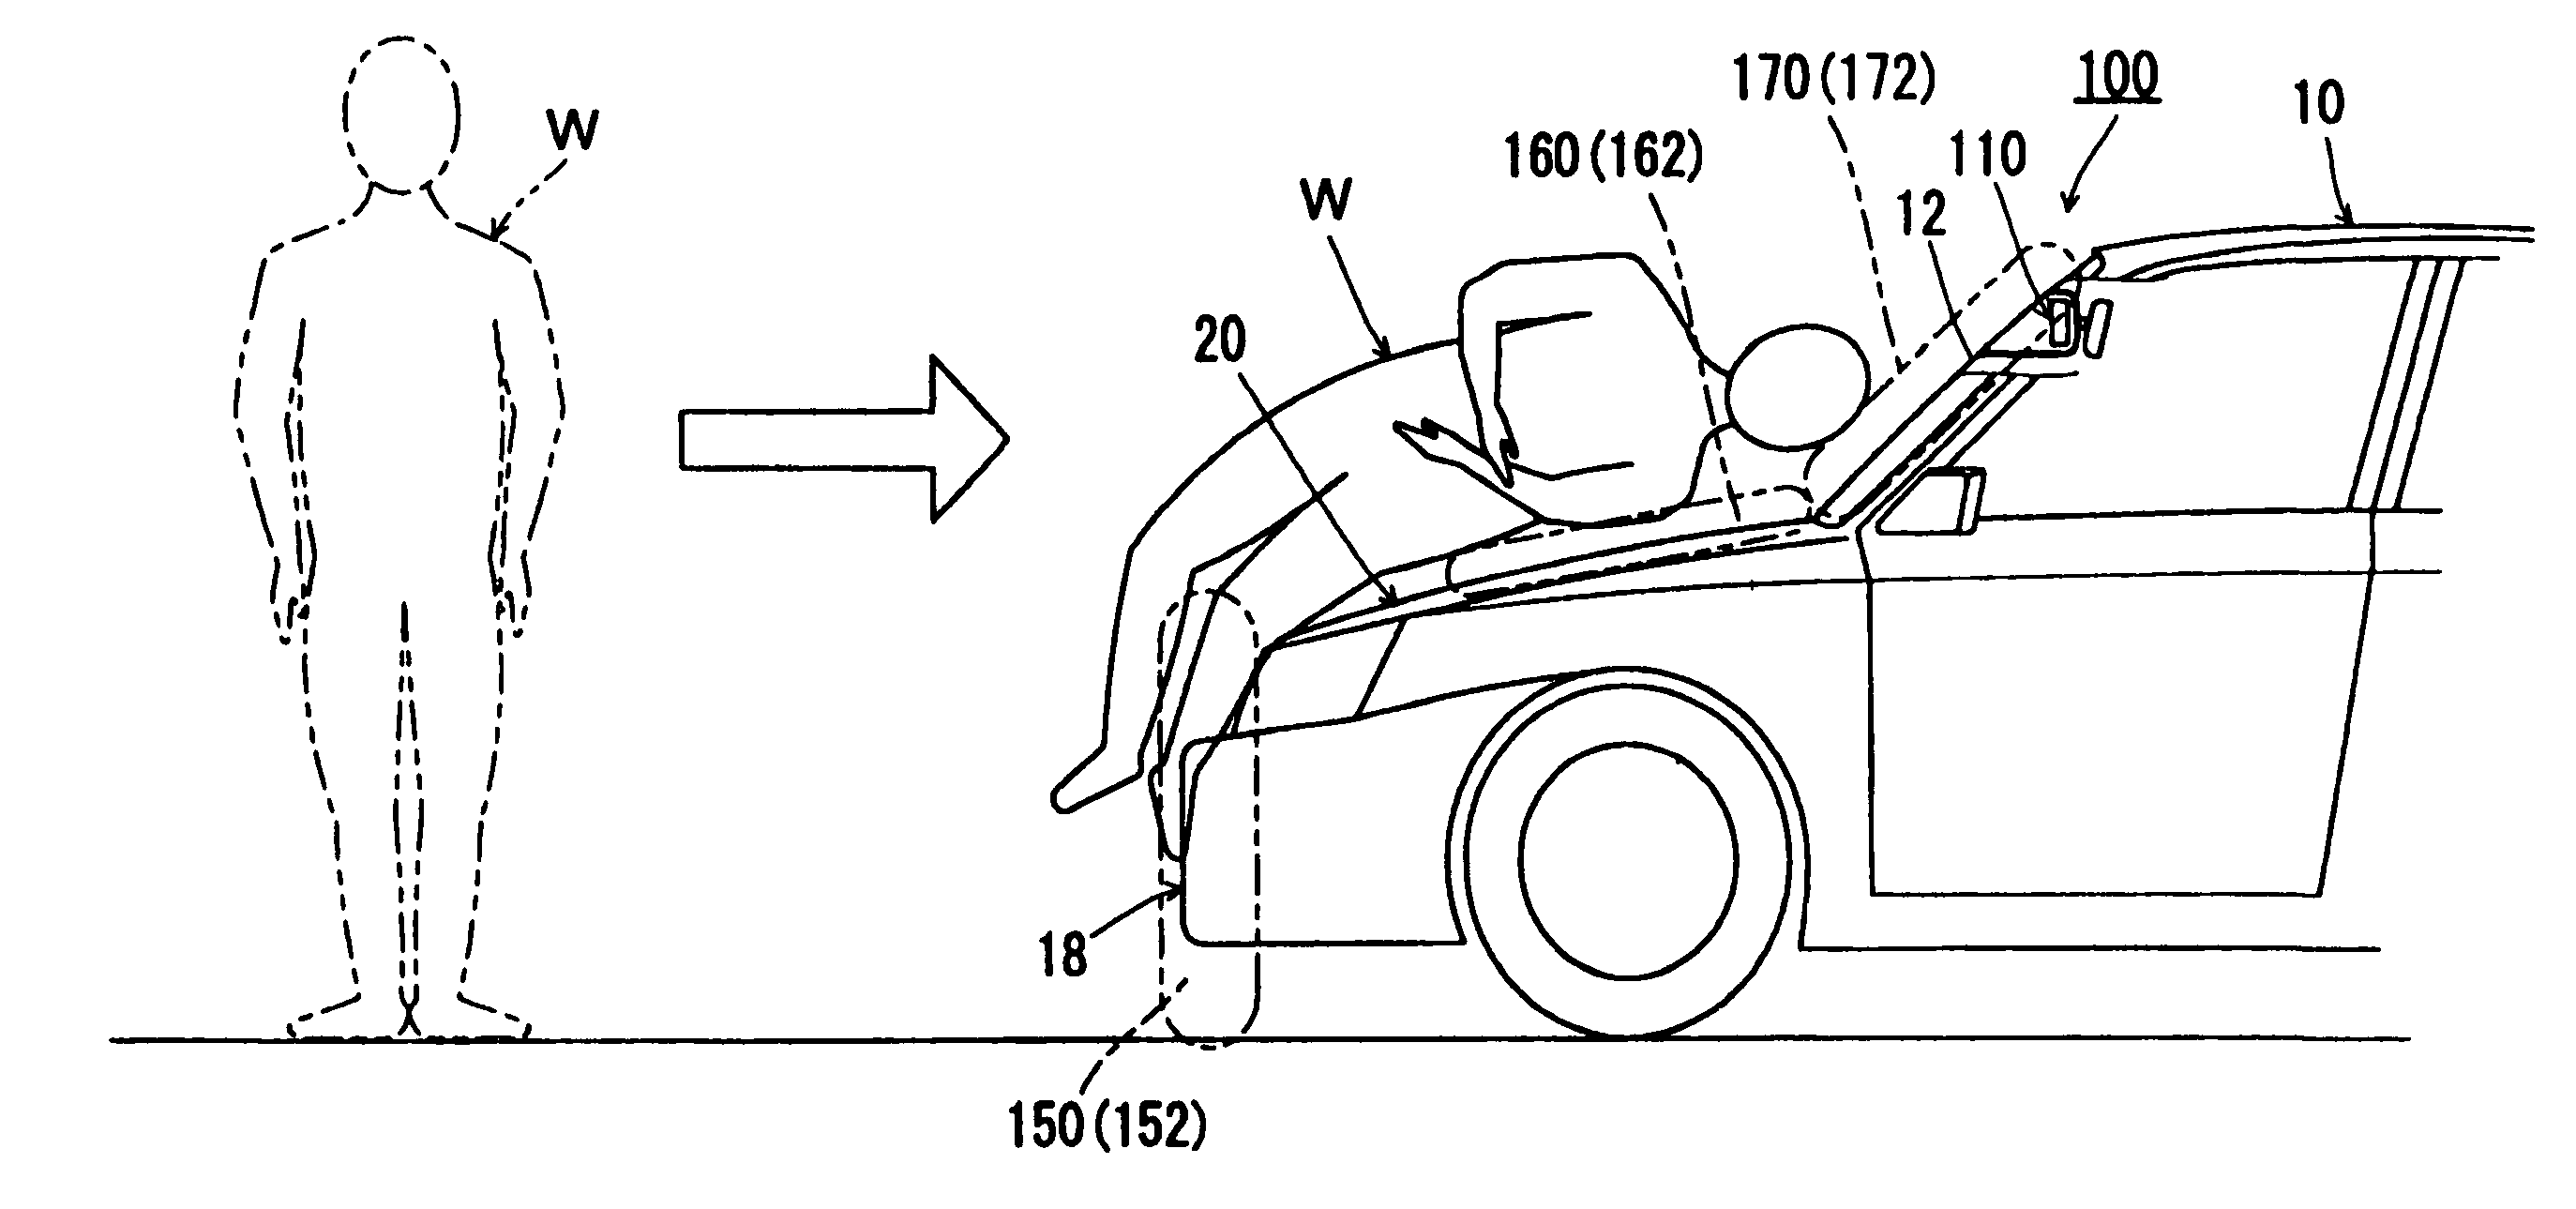 Object detection system, protection system, and vehicle